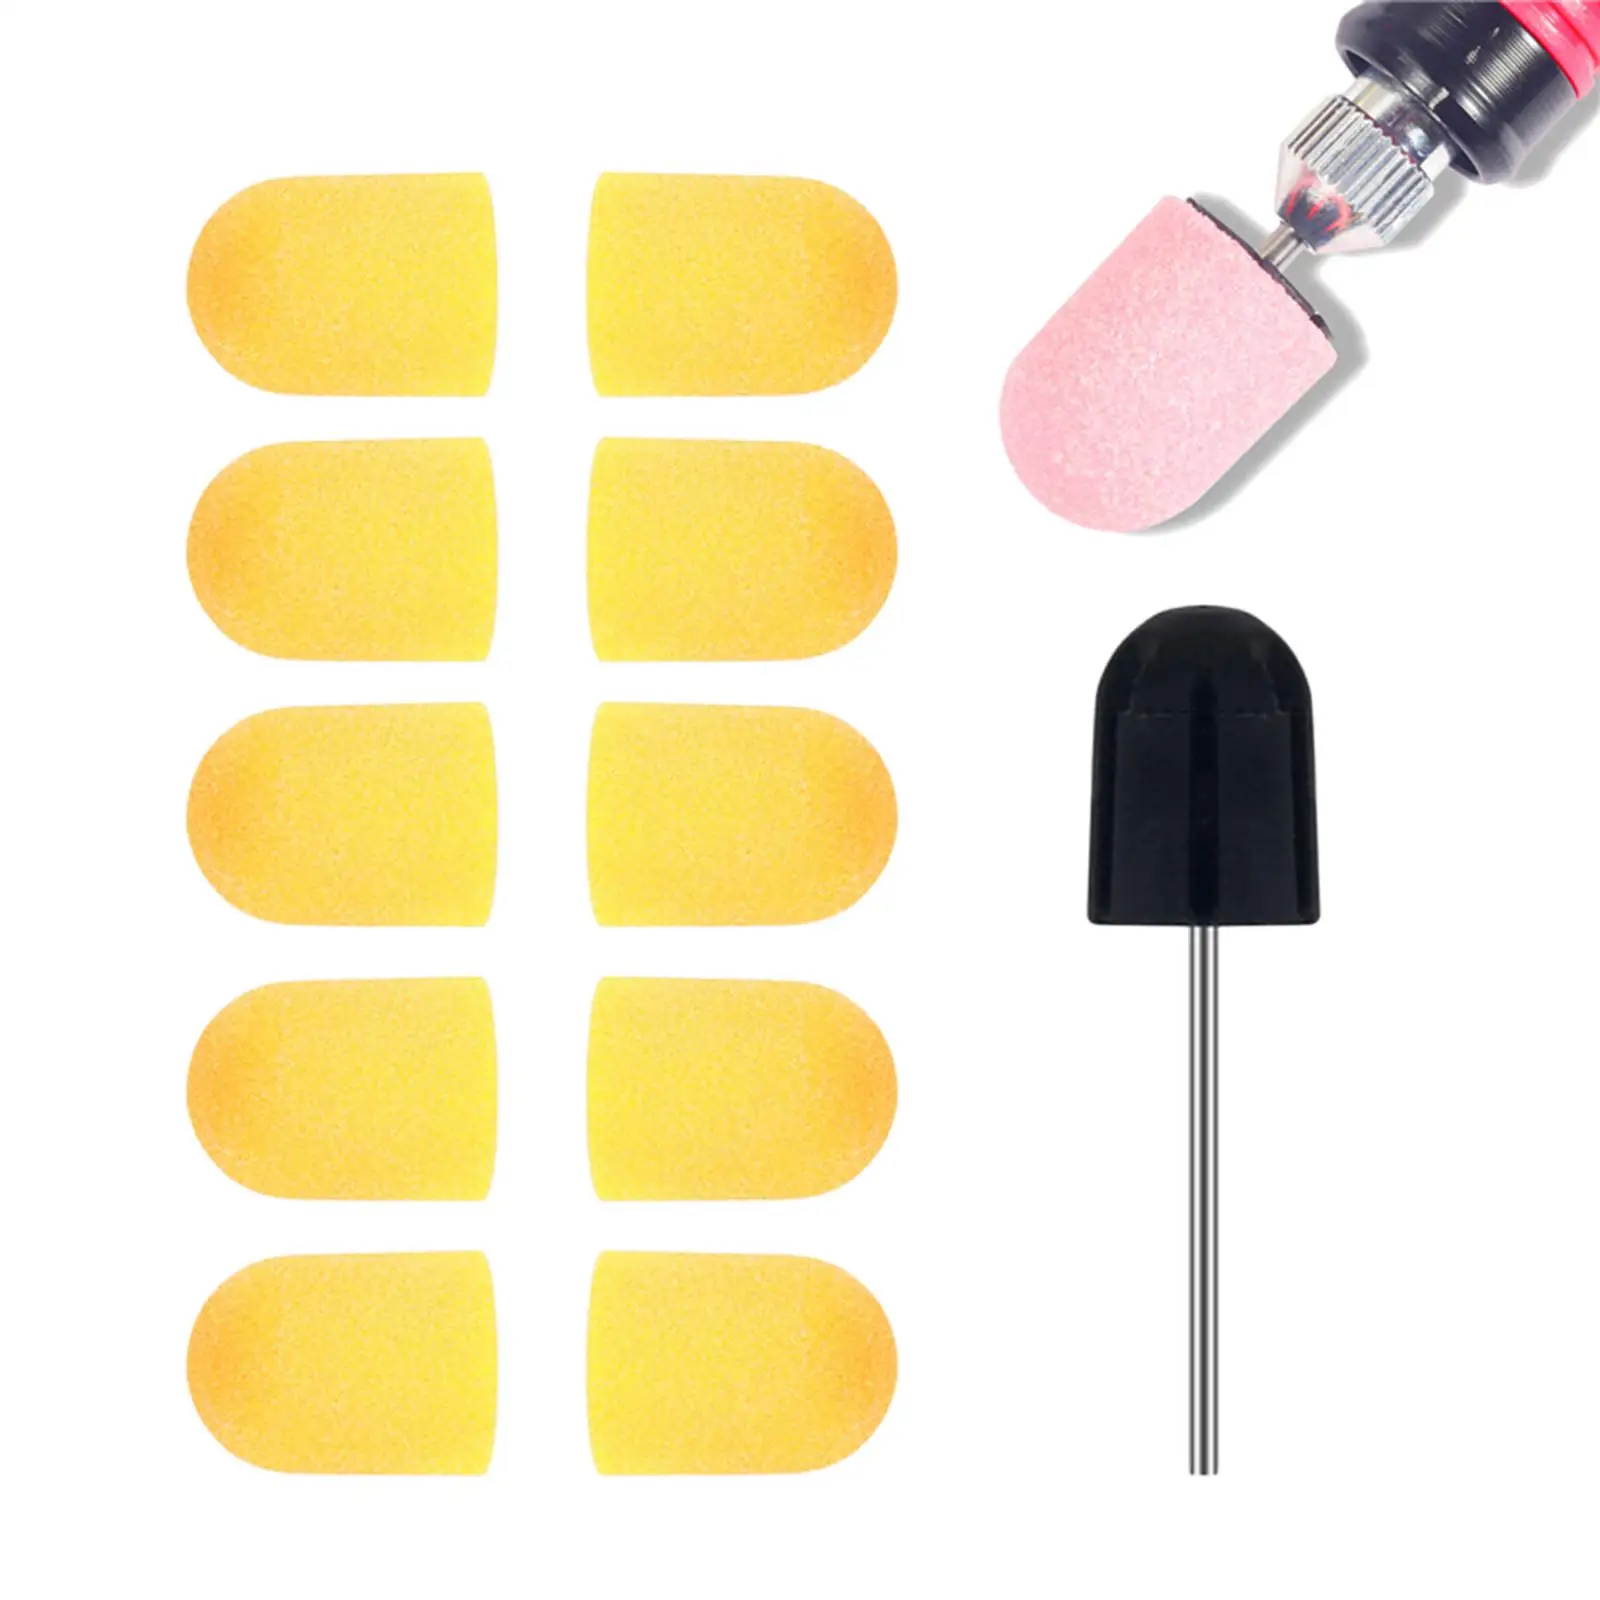 Nail Sanding Caps Bands Manicure Pedicure Electric Drill Tools Polisher Sanding Grinding Head for Salon Pedicure Cuticle Tools